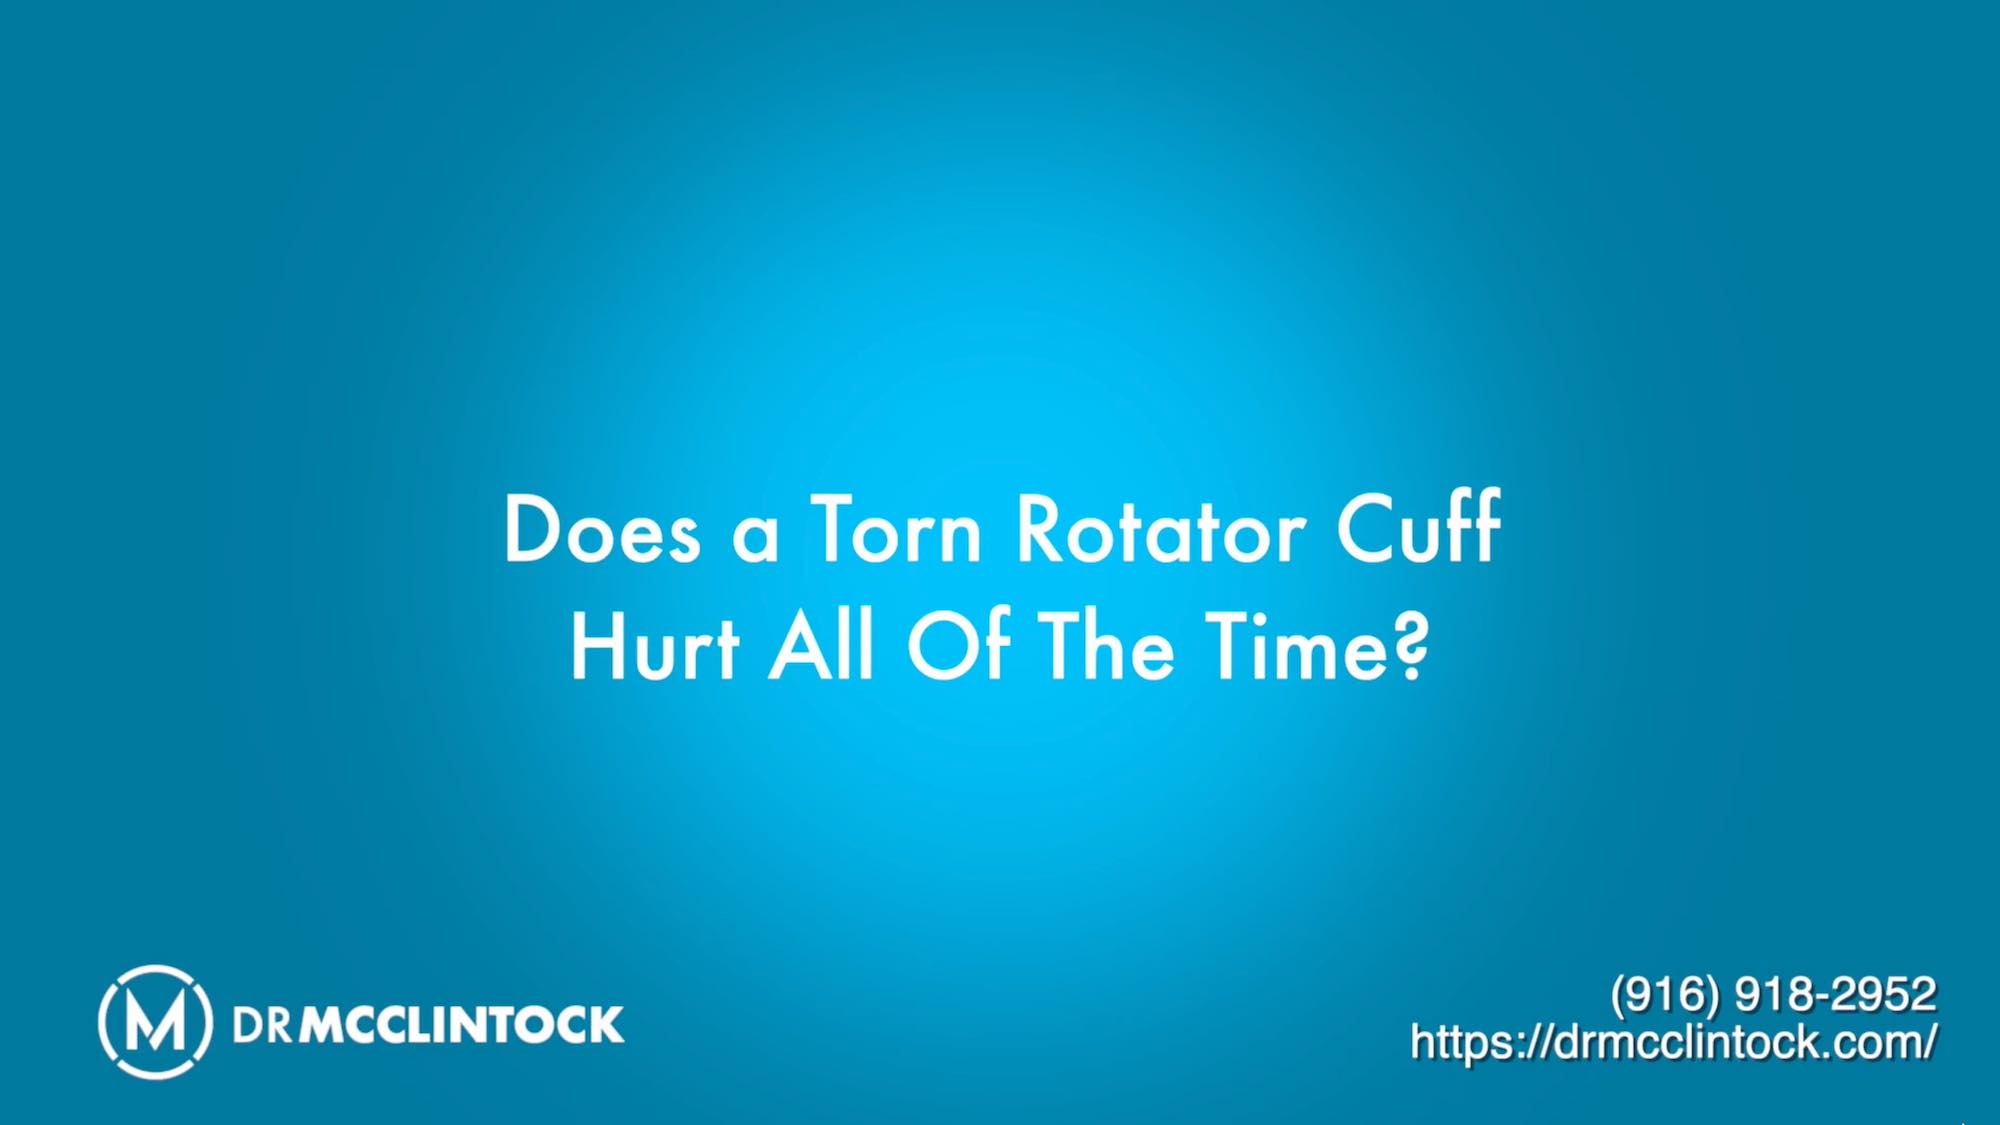 Does a Torn Rotator Cuff Hurt All the Time? video